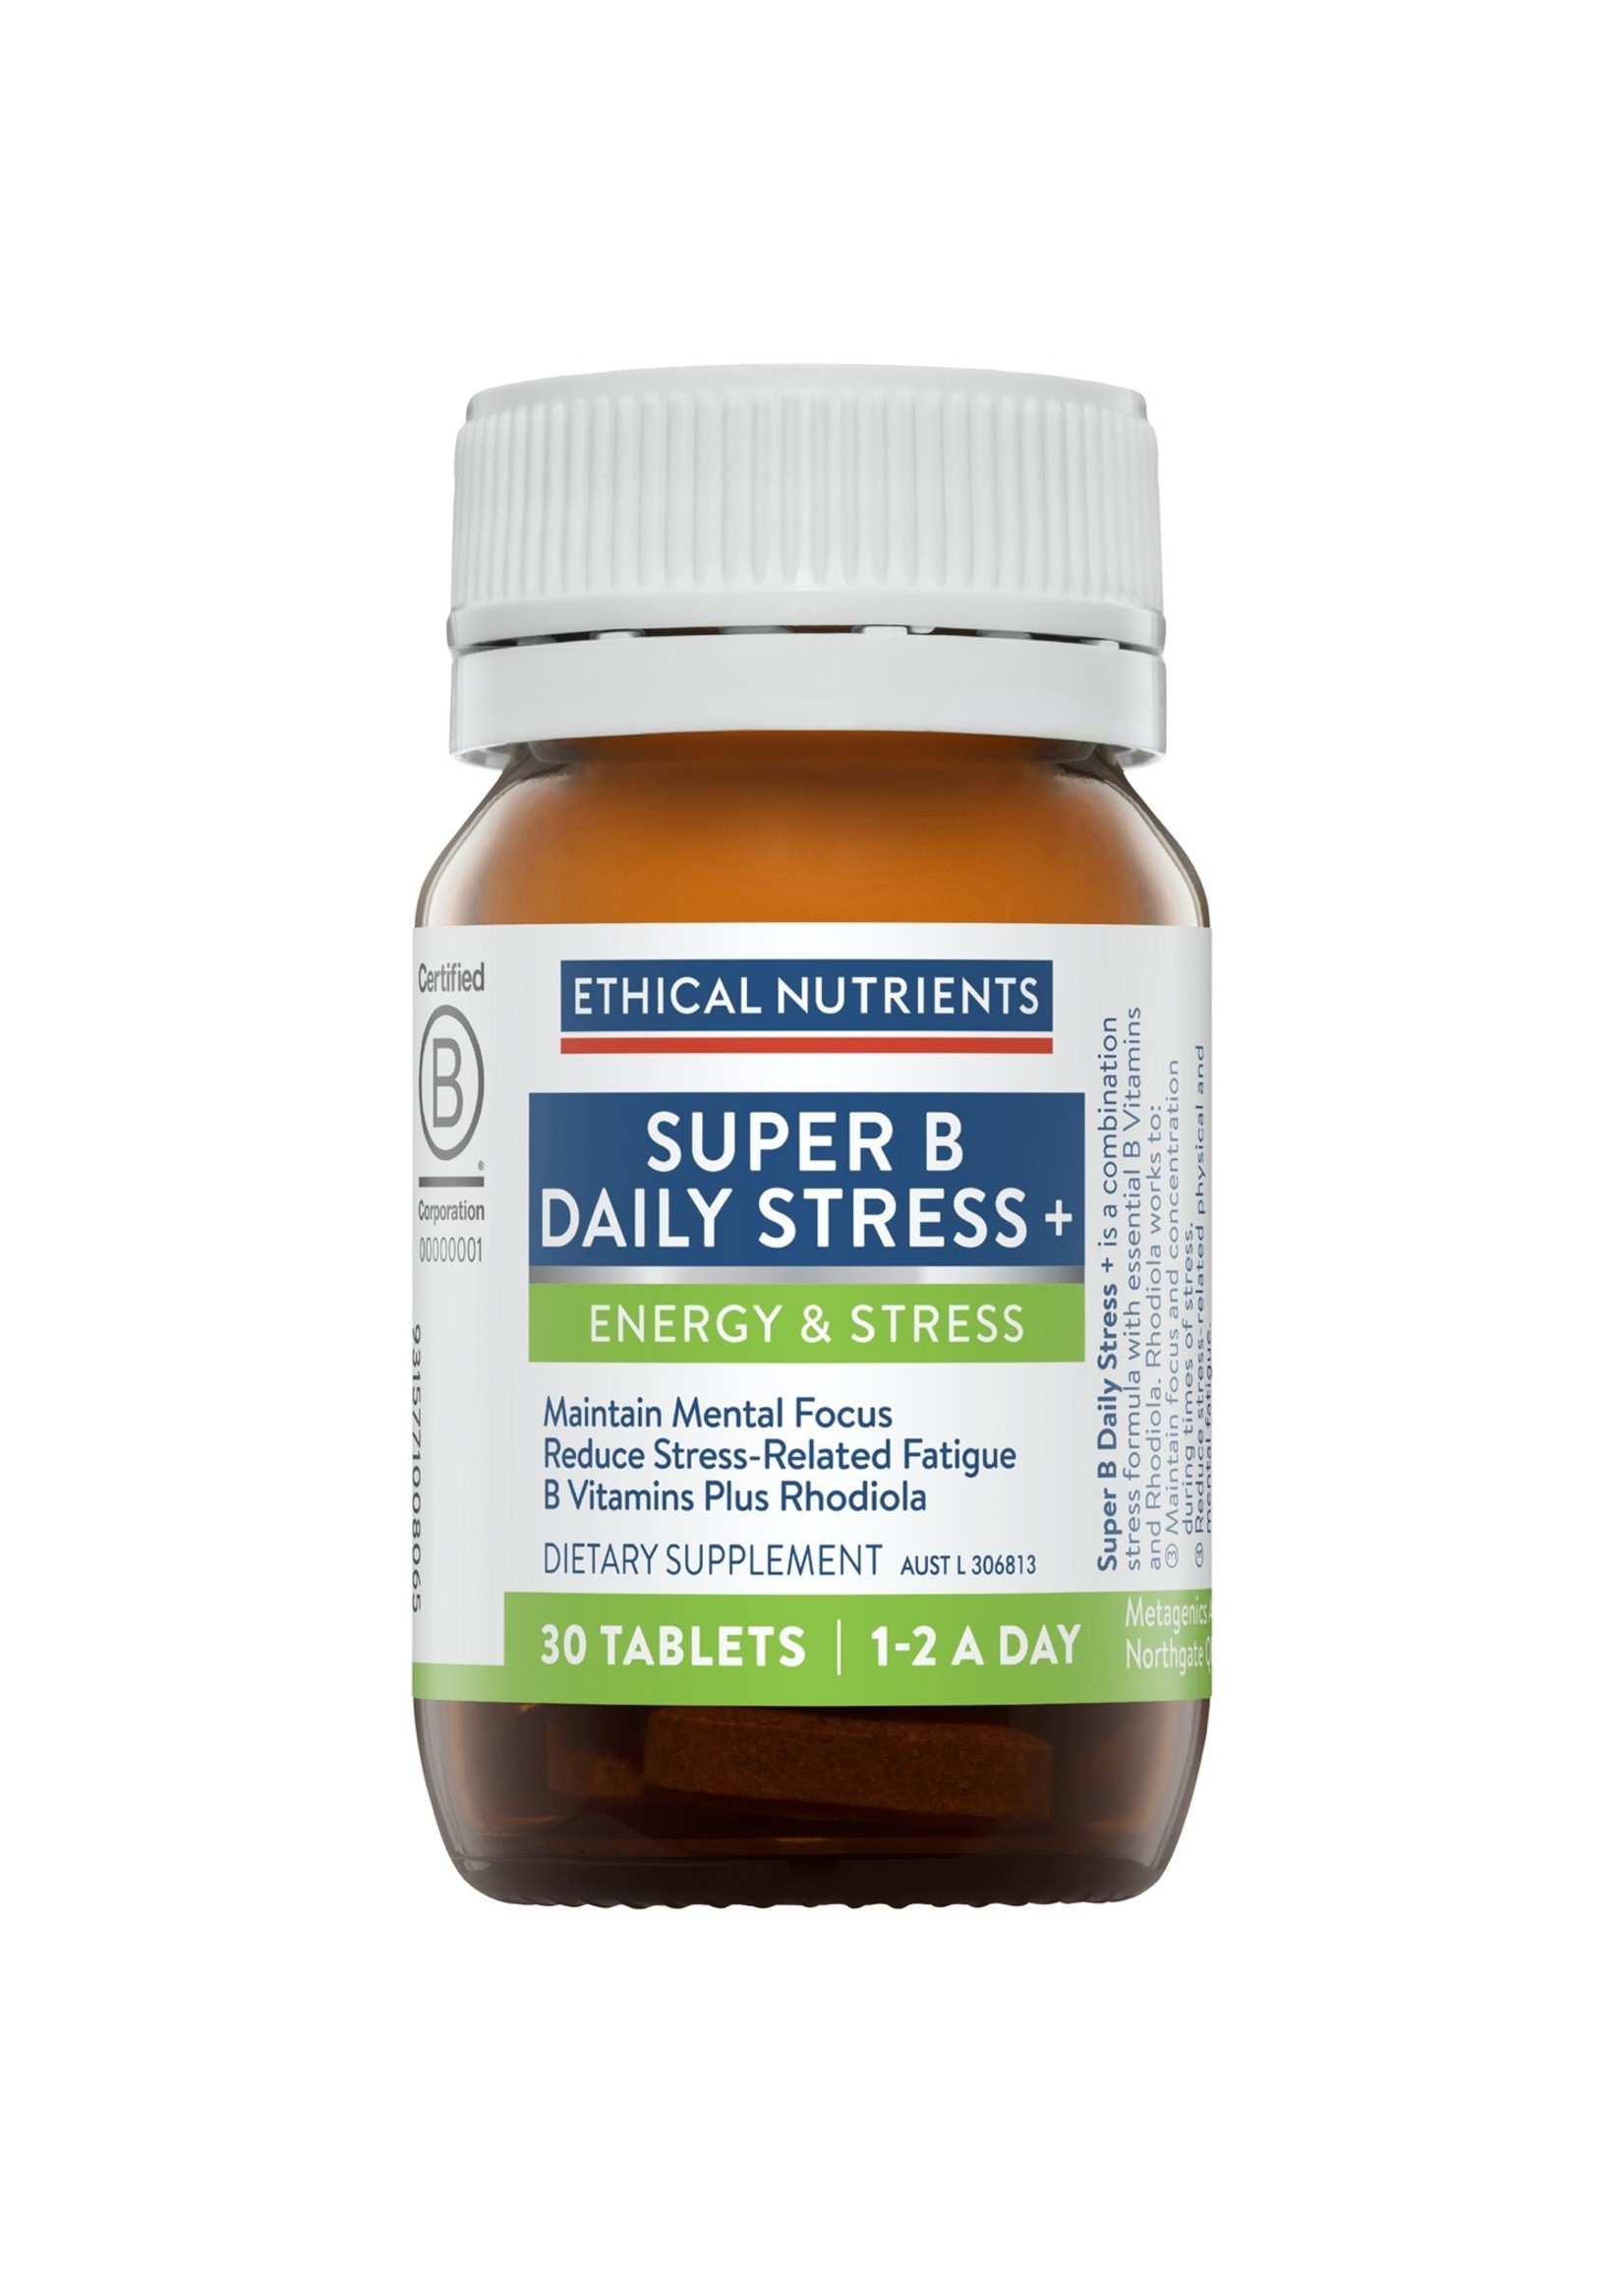 ETHICAL NUTRIENTS Ethical Nutrients Super B Daily Stress + 30 tabs